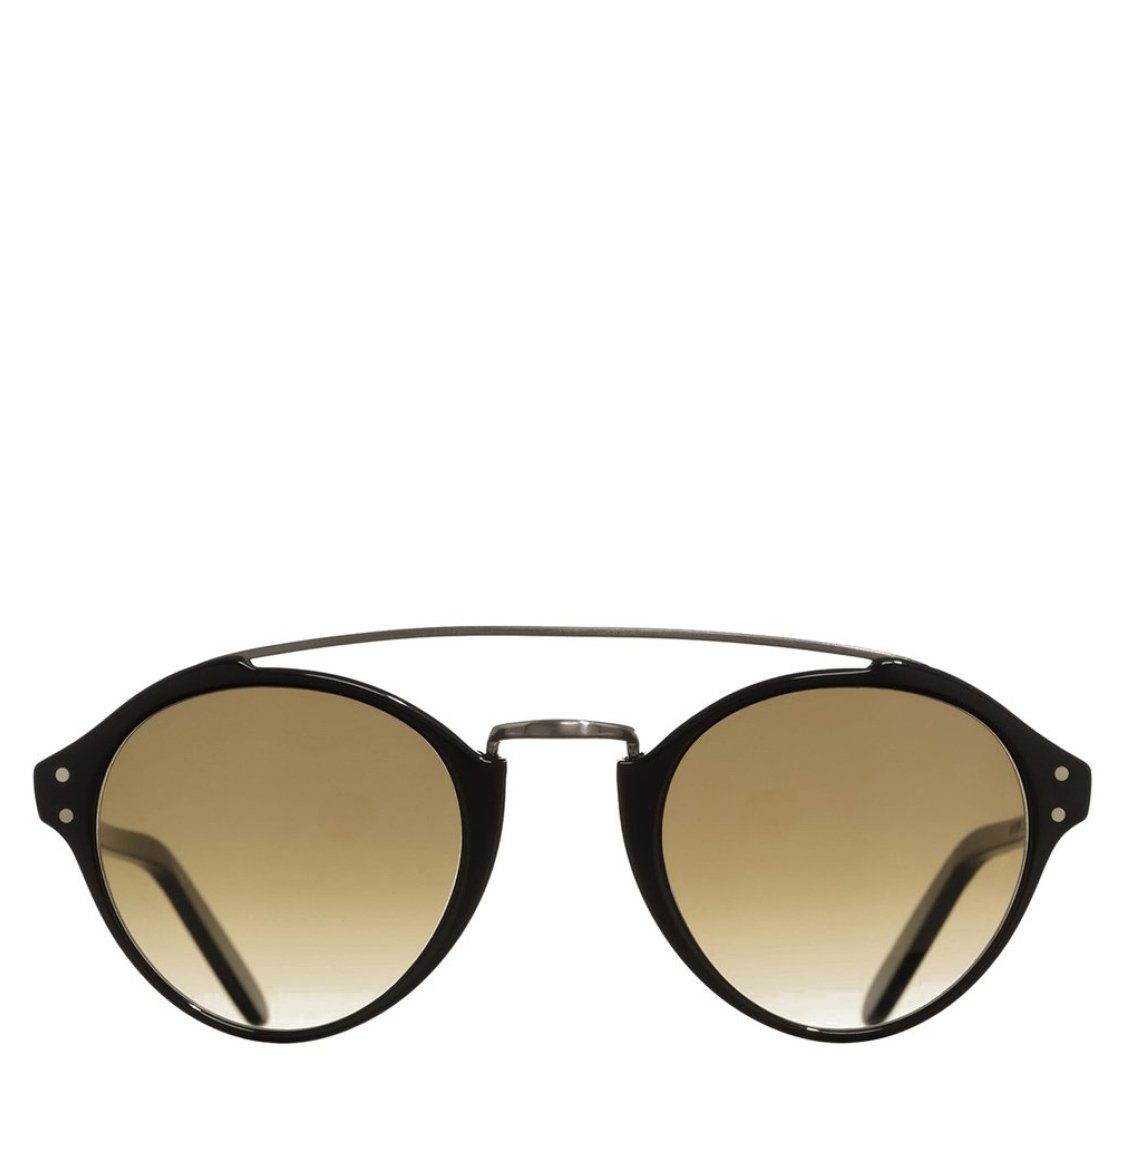 Cutler and Gross Oval-Frame Acetate Black Γυαλιά Ηλίου